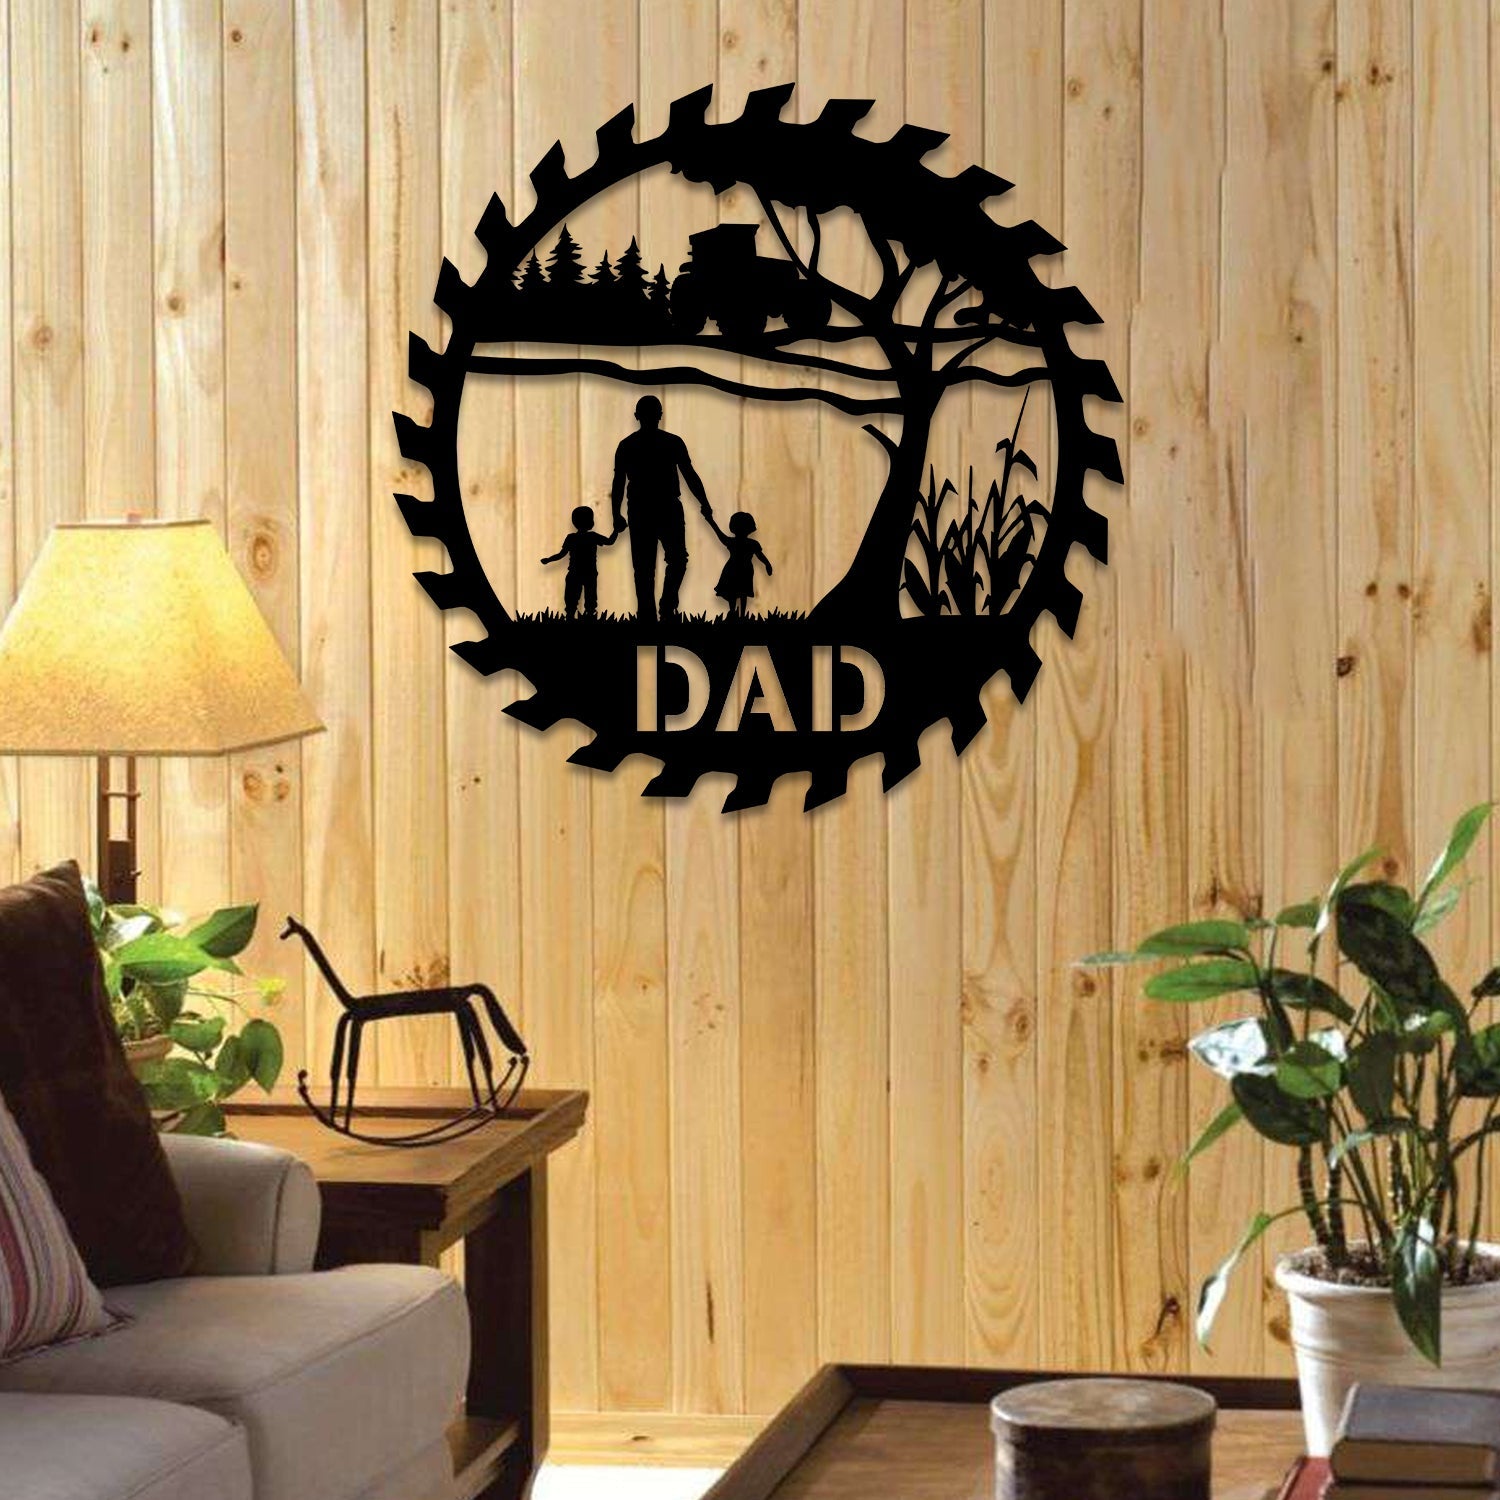 Customized Dad, Little Son And Daughter Metal Art, Farmhouse Art